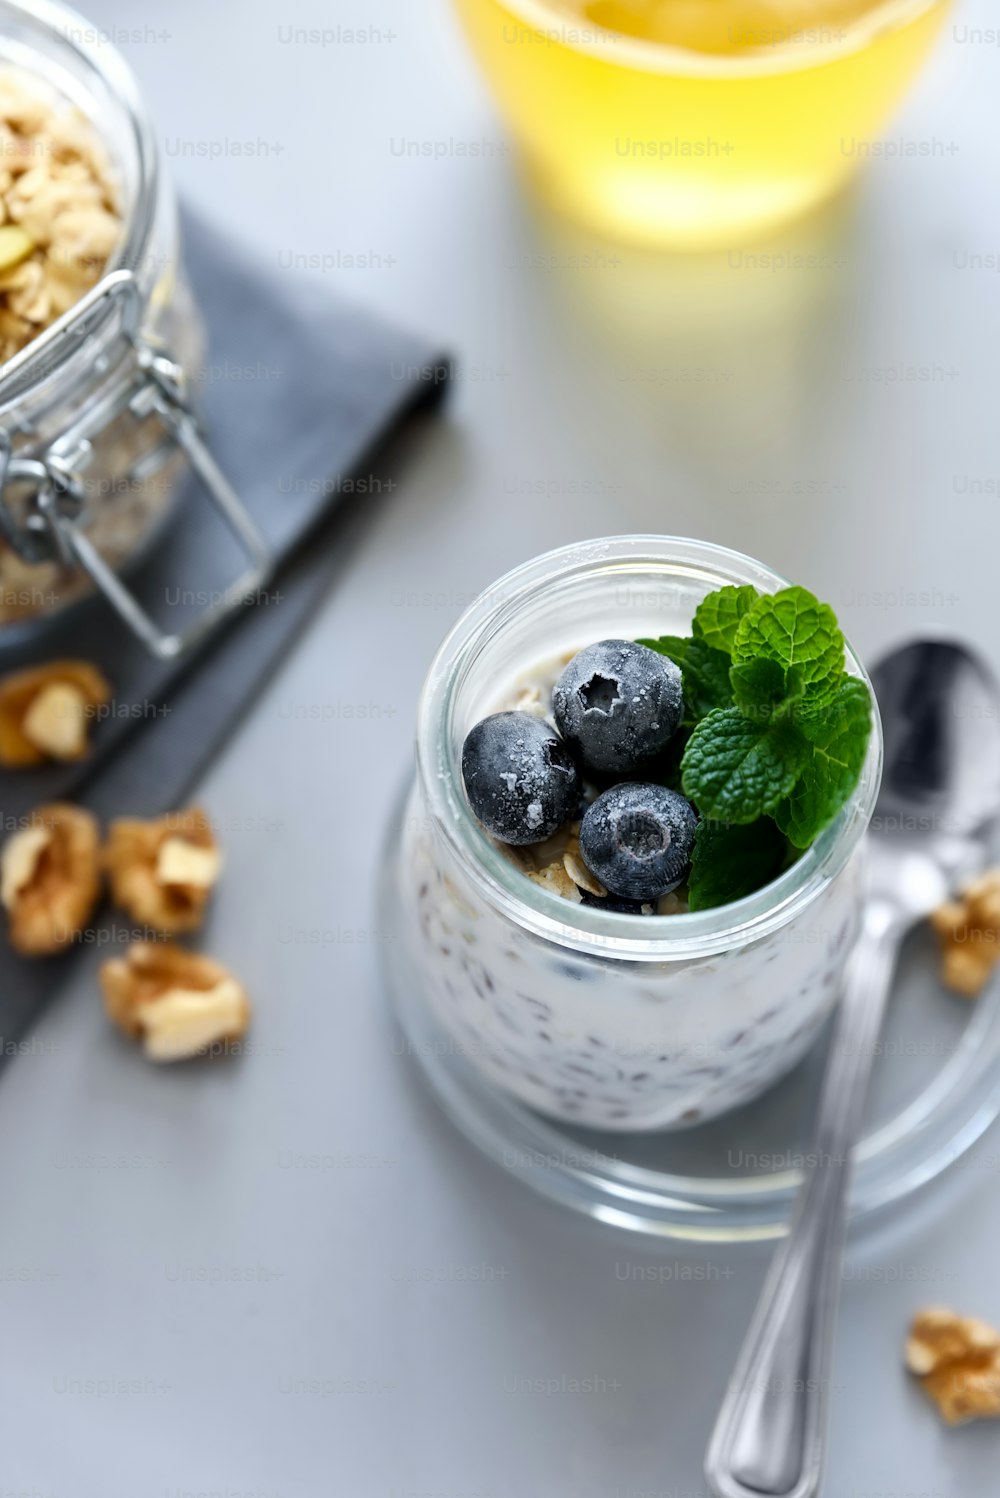 Chia seed pudding with granola, blueberry, walnut and honey decorated mint leaves on gray background. Selective focus. Healthy eating or vegetarian food concept